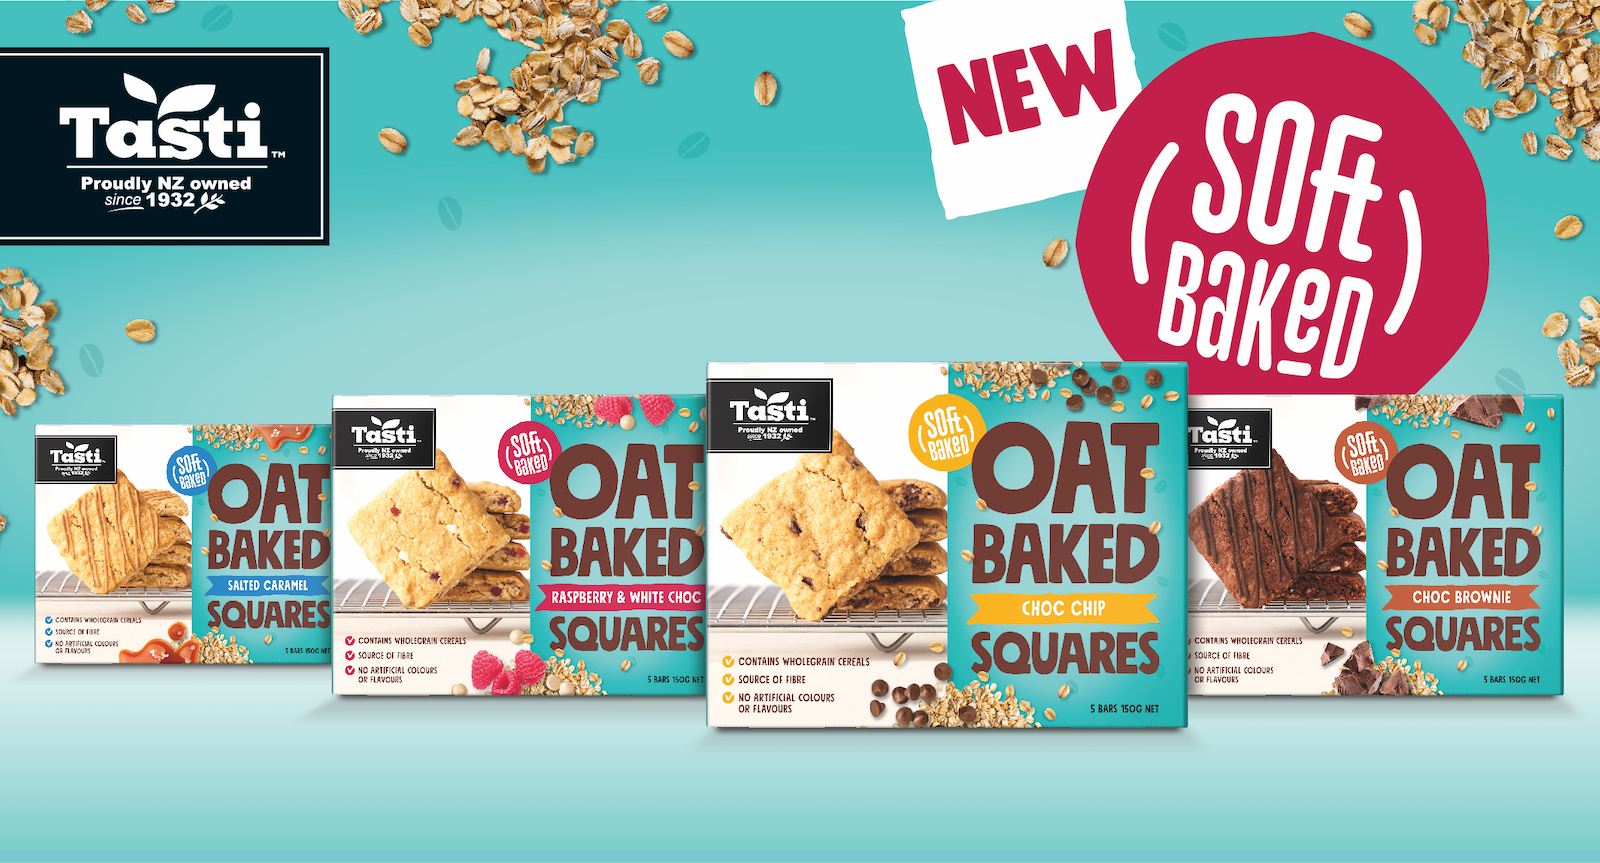 Boxes of Tasti soft baked oat squares in four flavours - Salted Caramel, Raspberry and White Choc, Choc Chip, and Choc Brownie